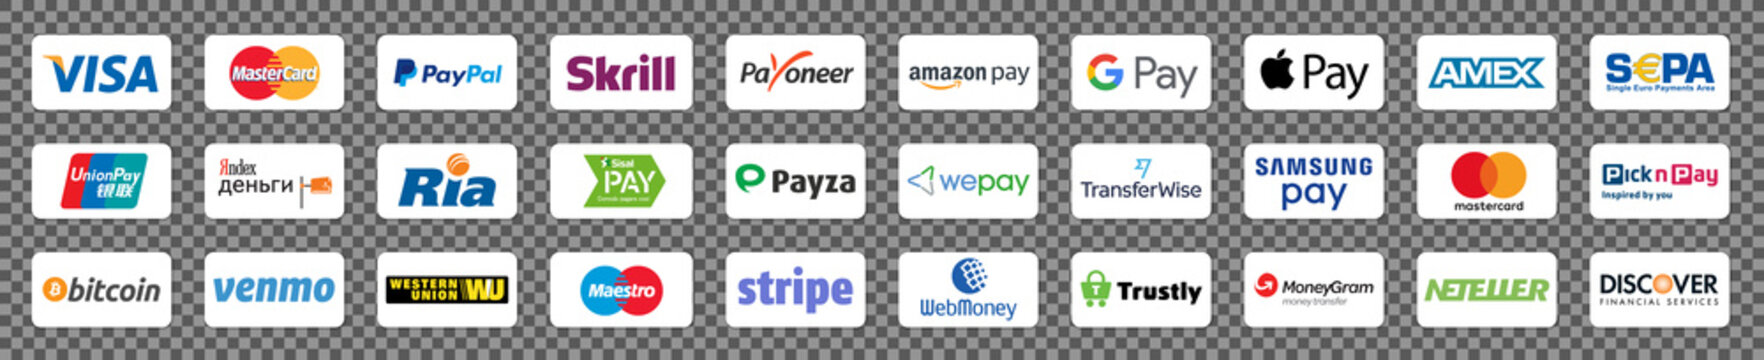 Kiev, Ukraine - November 08, 2020: Online payment methods systems icons set, card company logo: Visa, Mastercard, Paypal, Bitcoin, Amazon Pay, Apple Pay... E-commerce payments. Editorial vector